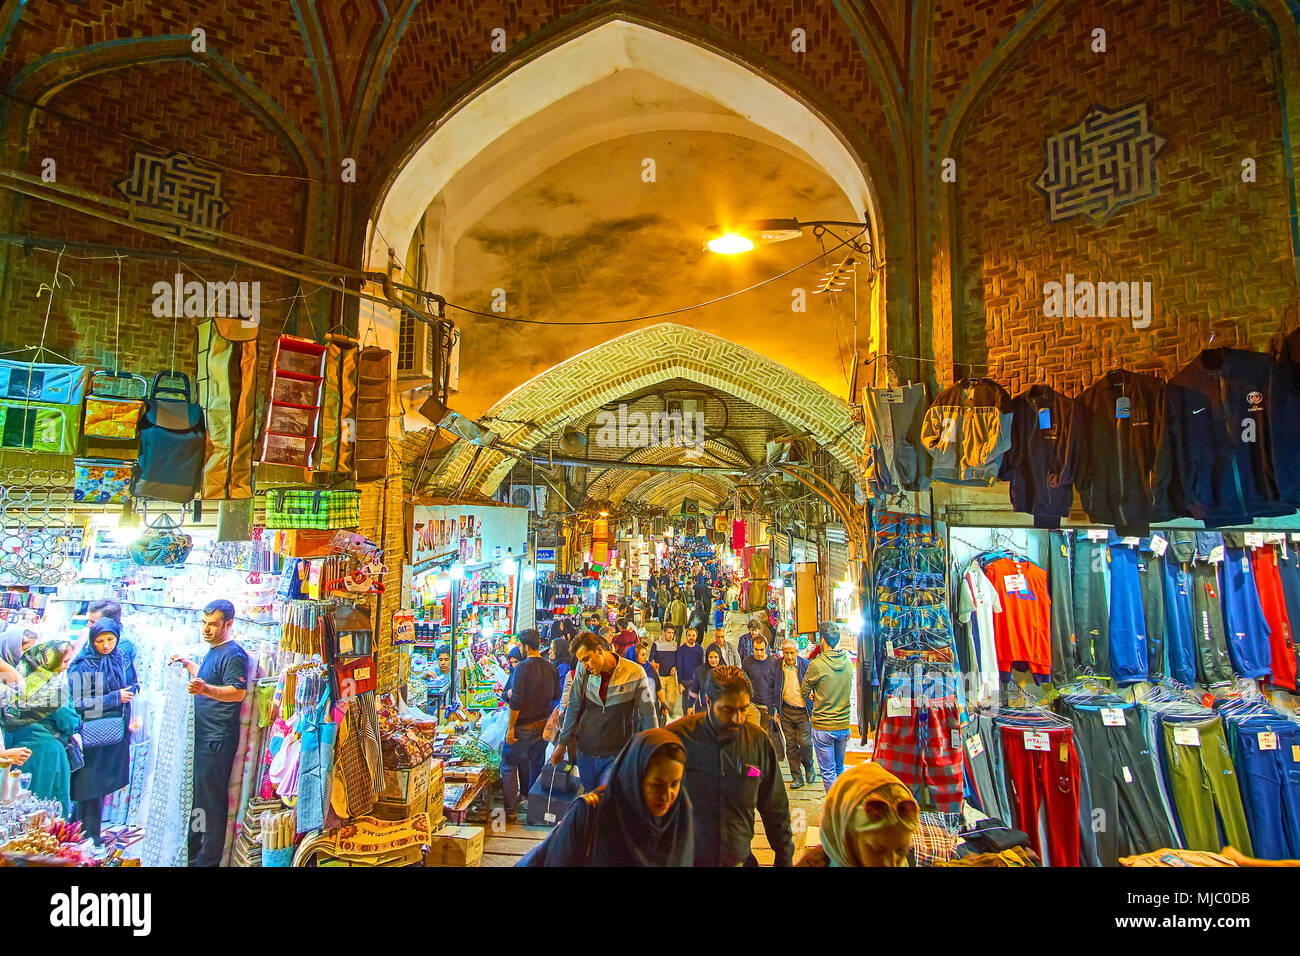 TEHRAN, IRAN - OCTOBER 25, 2017: Evening is the most busiest time in old Grand Bazaar, all stores are open and crowds of clients walk in archways of t Stock Photo